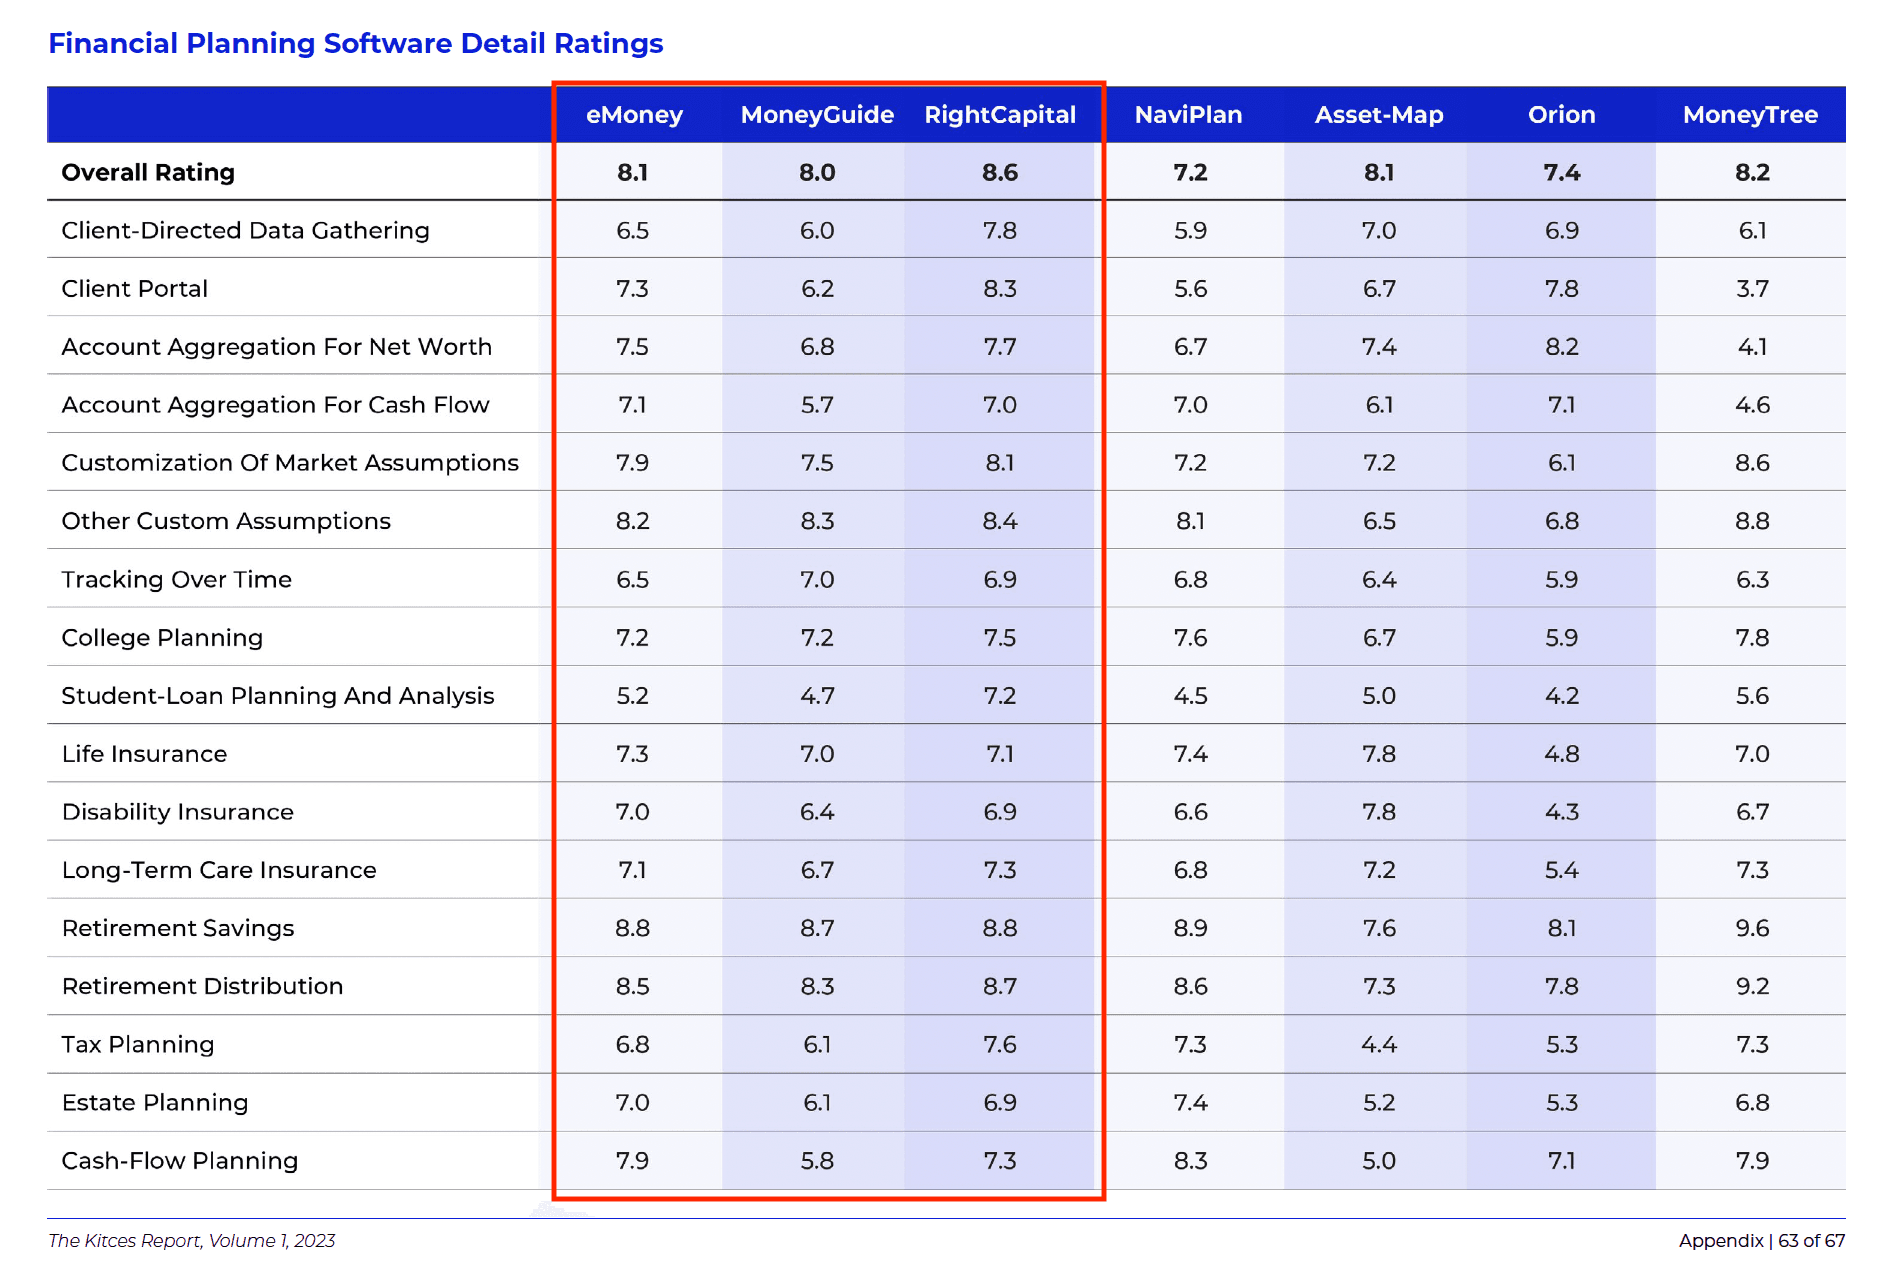 Chart from Kitces 2023 report showing RightCapital's lead in categories such as overall rating, student loan planning and analysis, and client portal